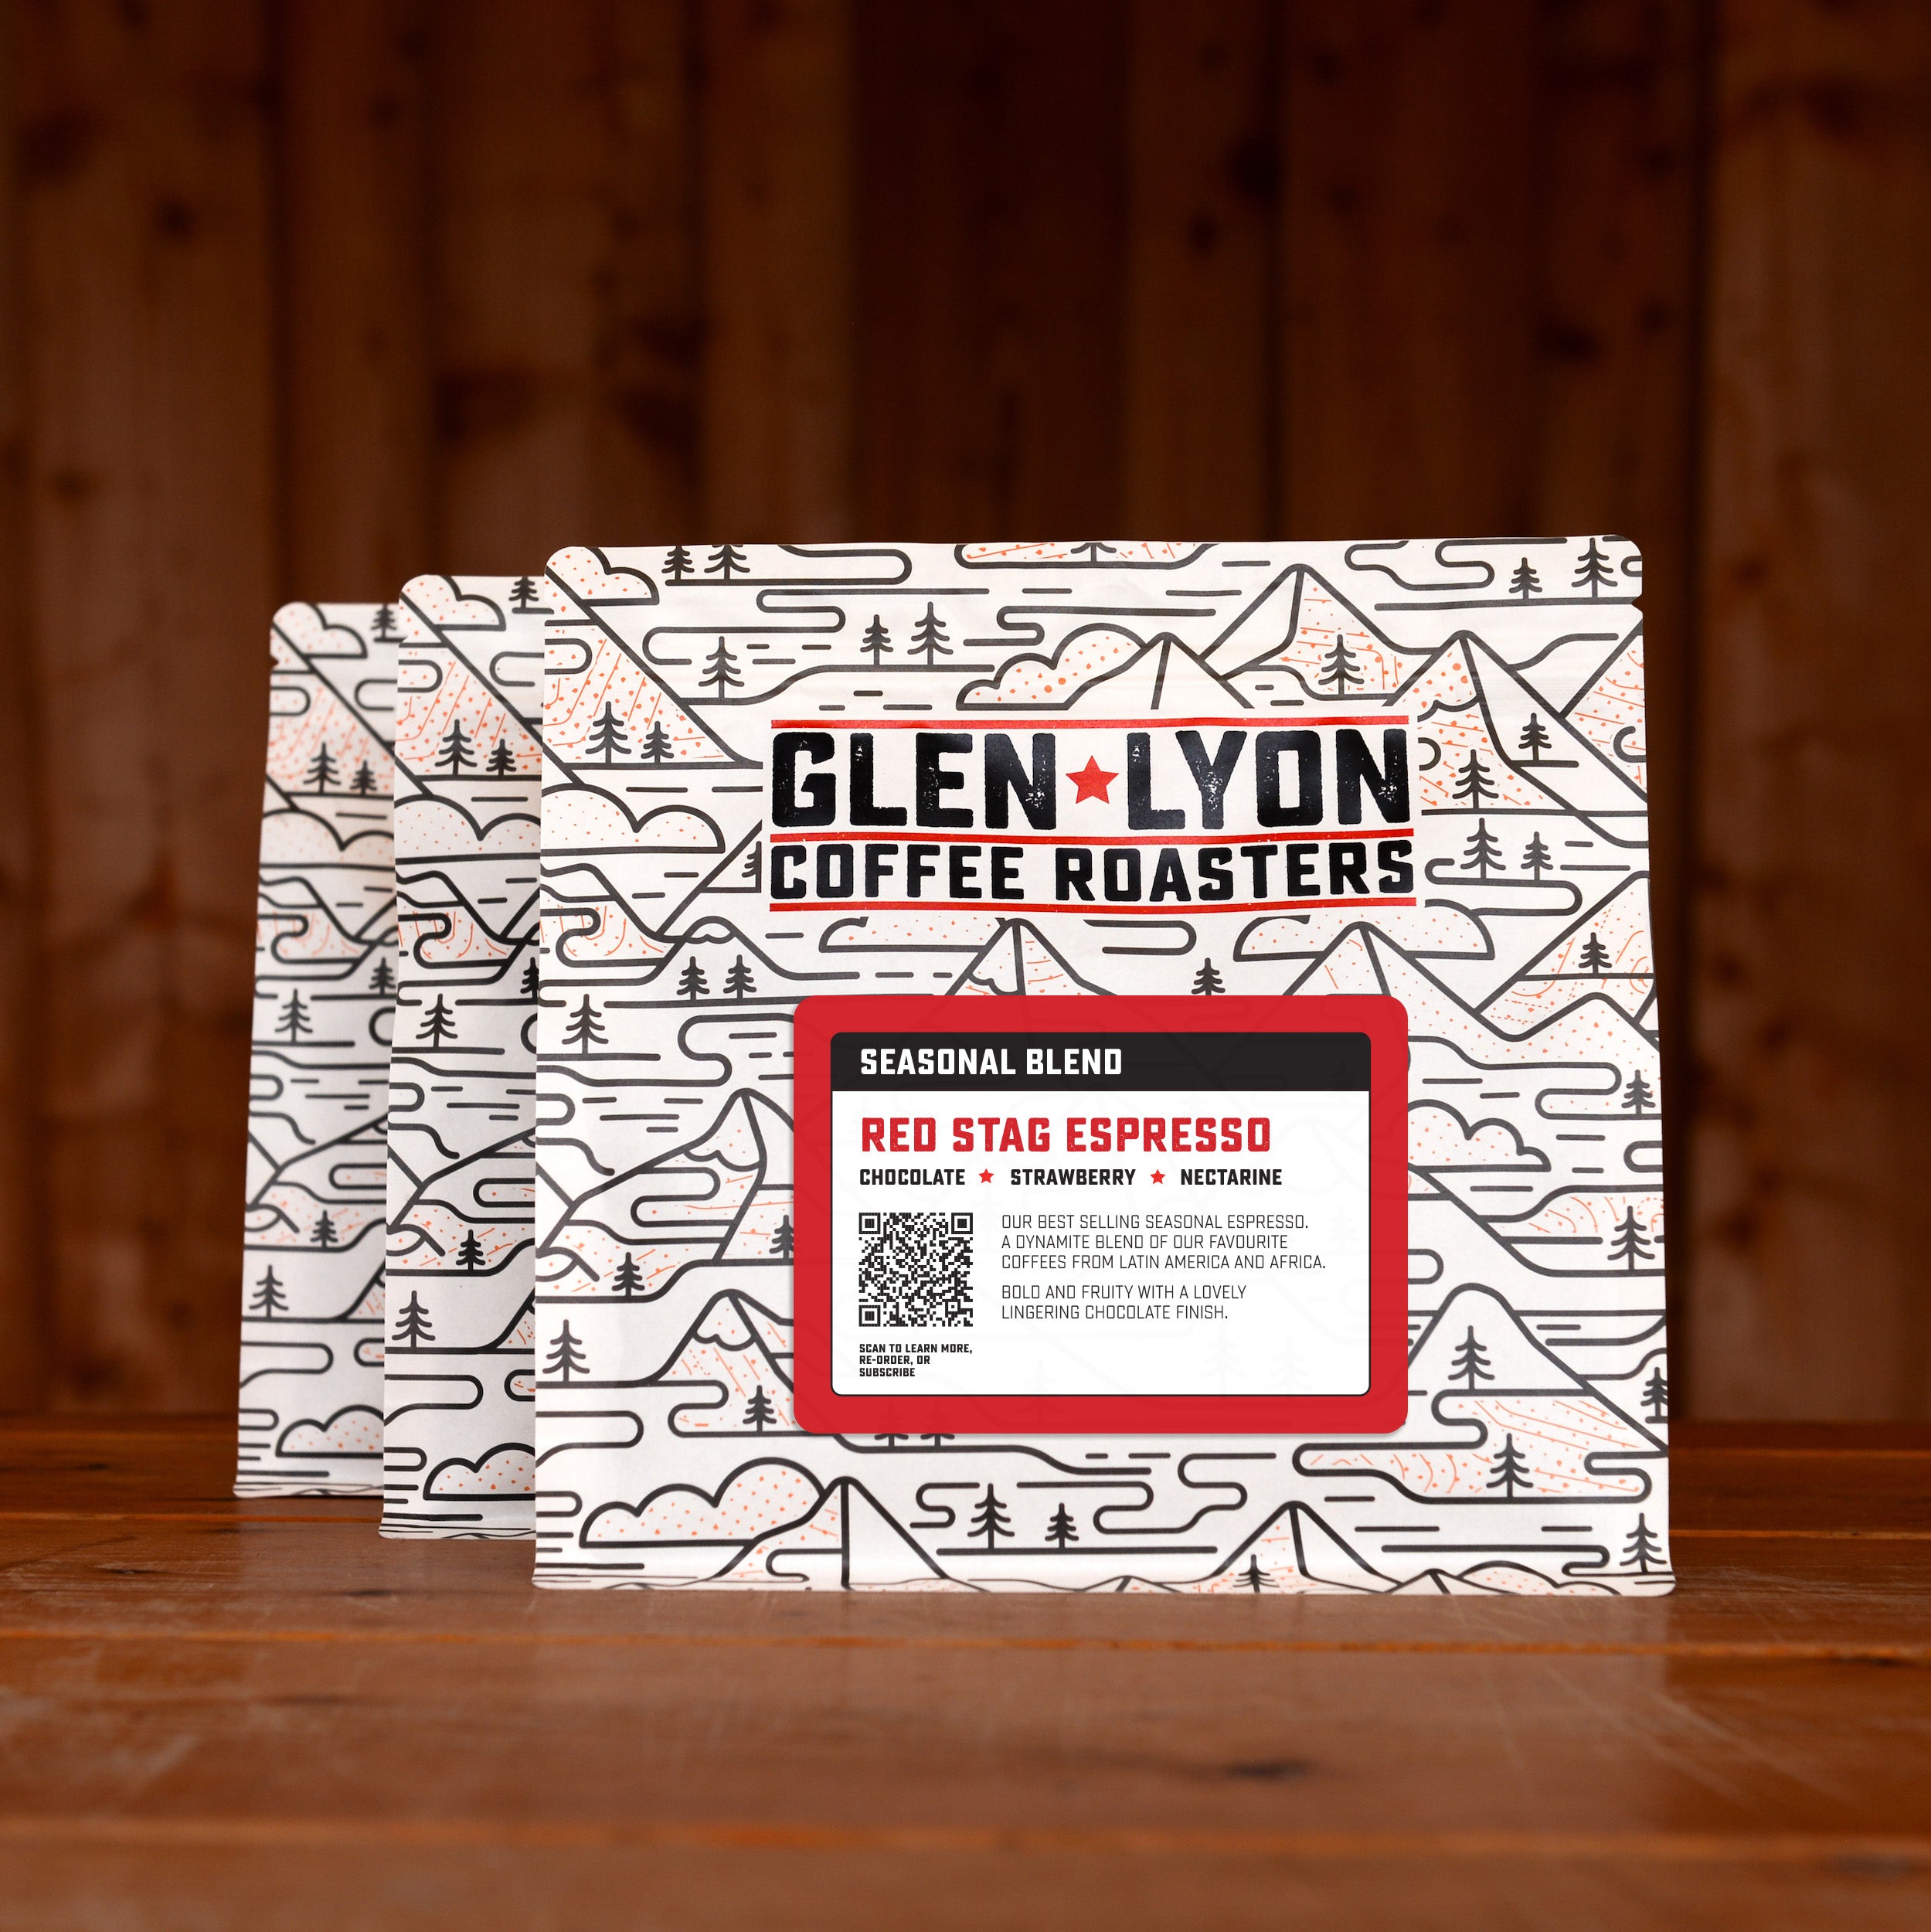 3 bags of Red Stag Espresso subscription labelled speciality coffee from Glen Lyon Coffee Roasters against a warm wood-tinged background